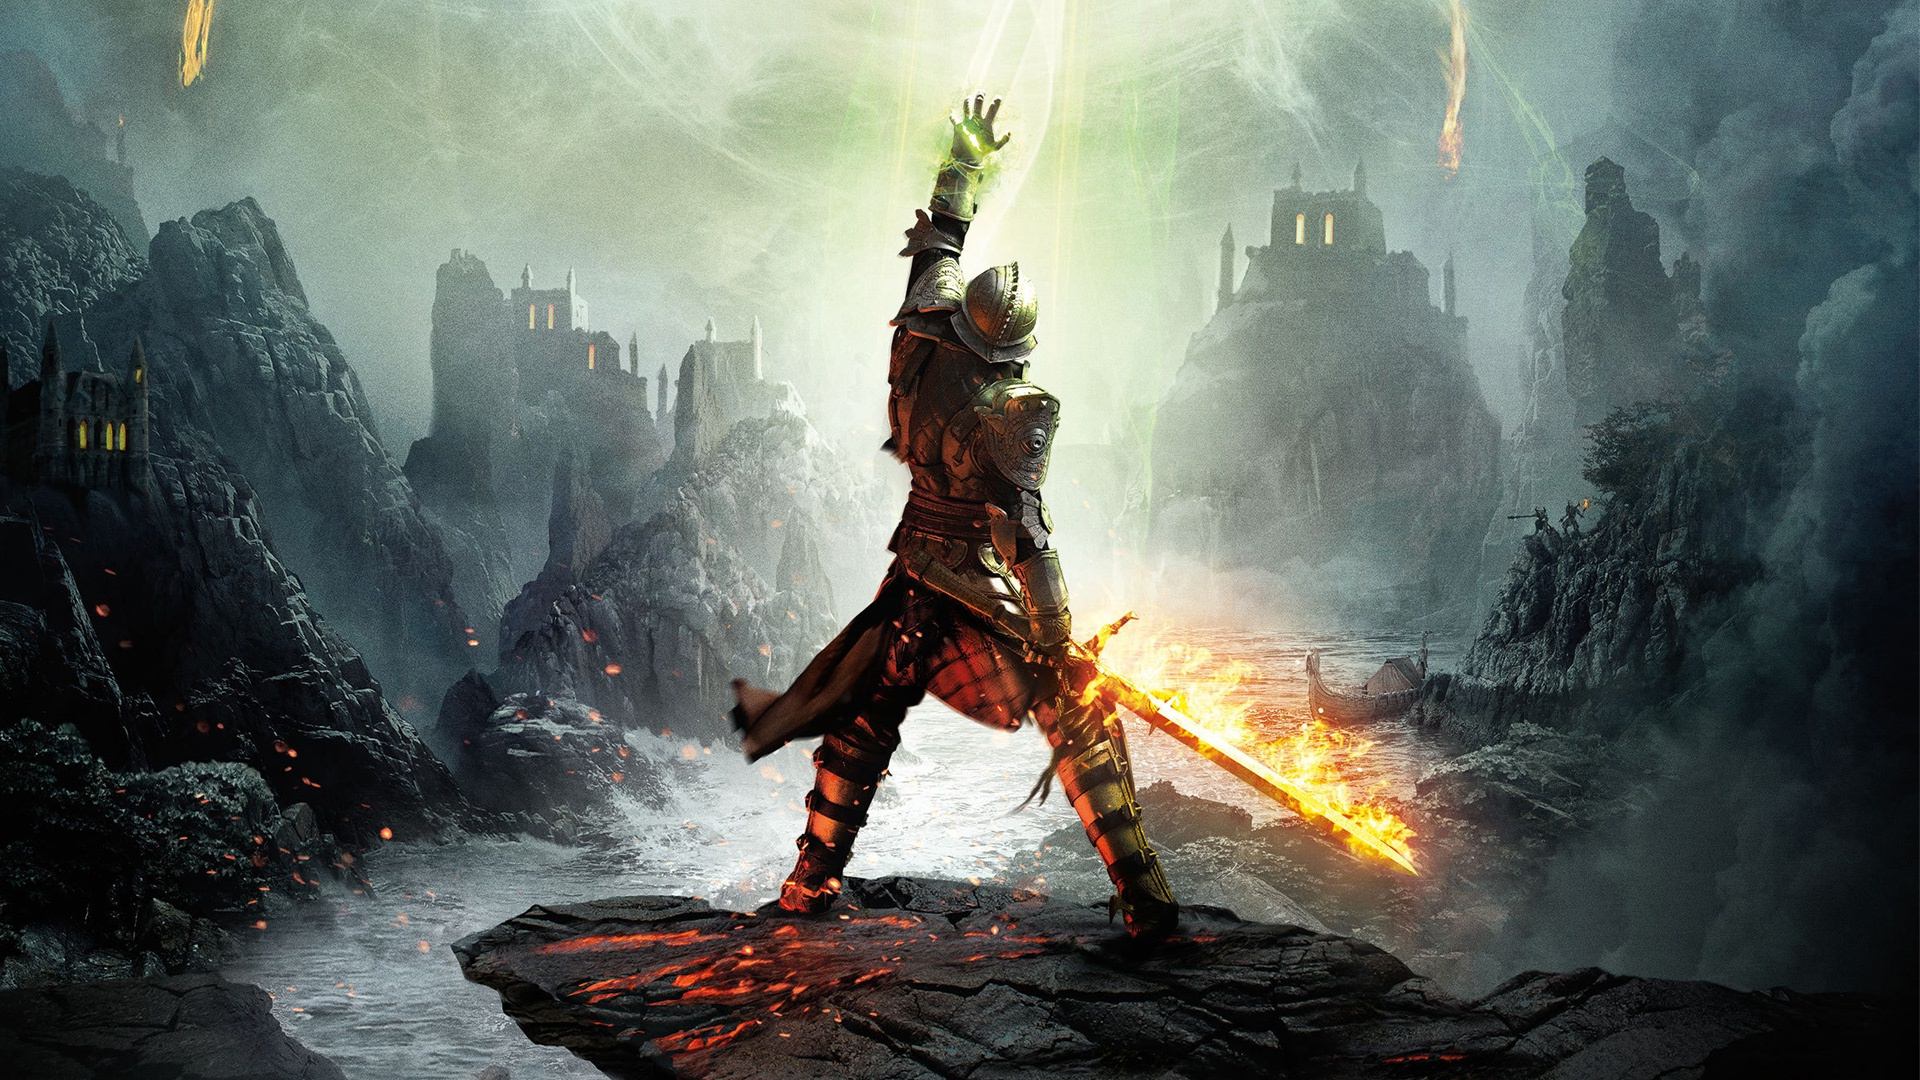 60 minutes with Dragon Age: Inquisition (Gameplay)